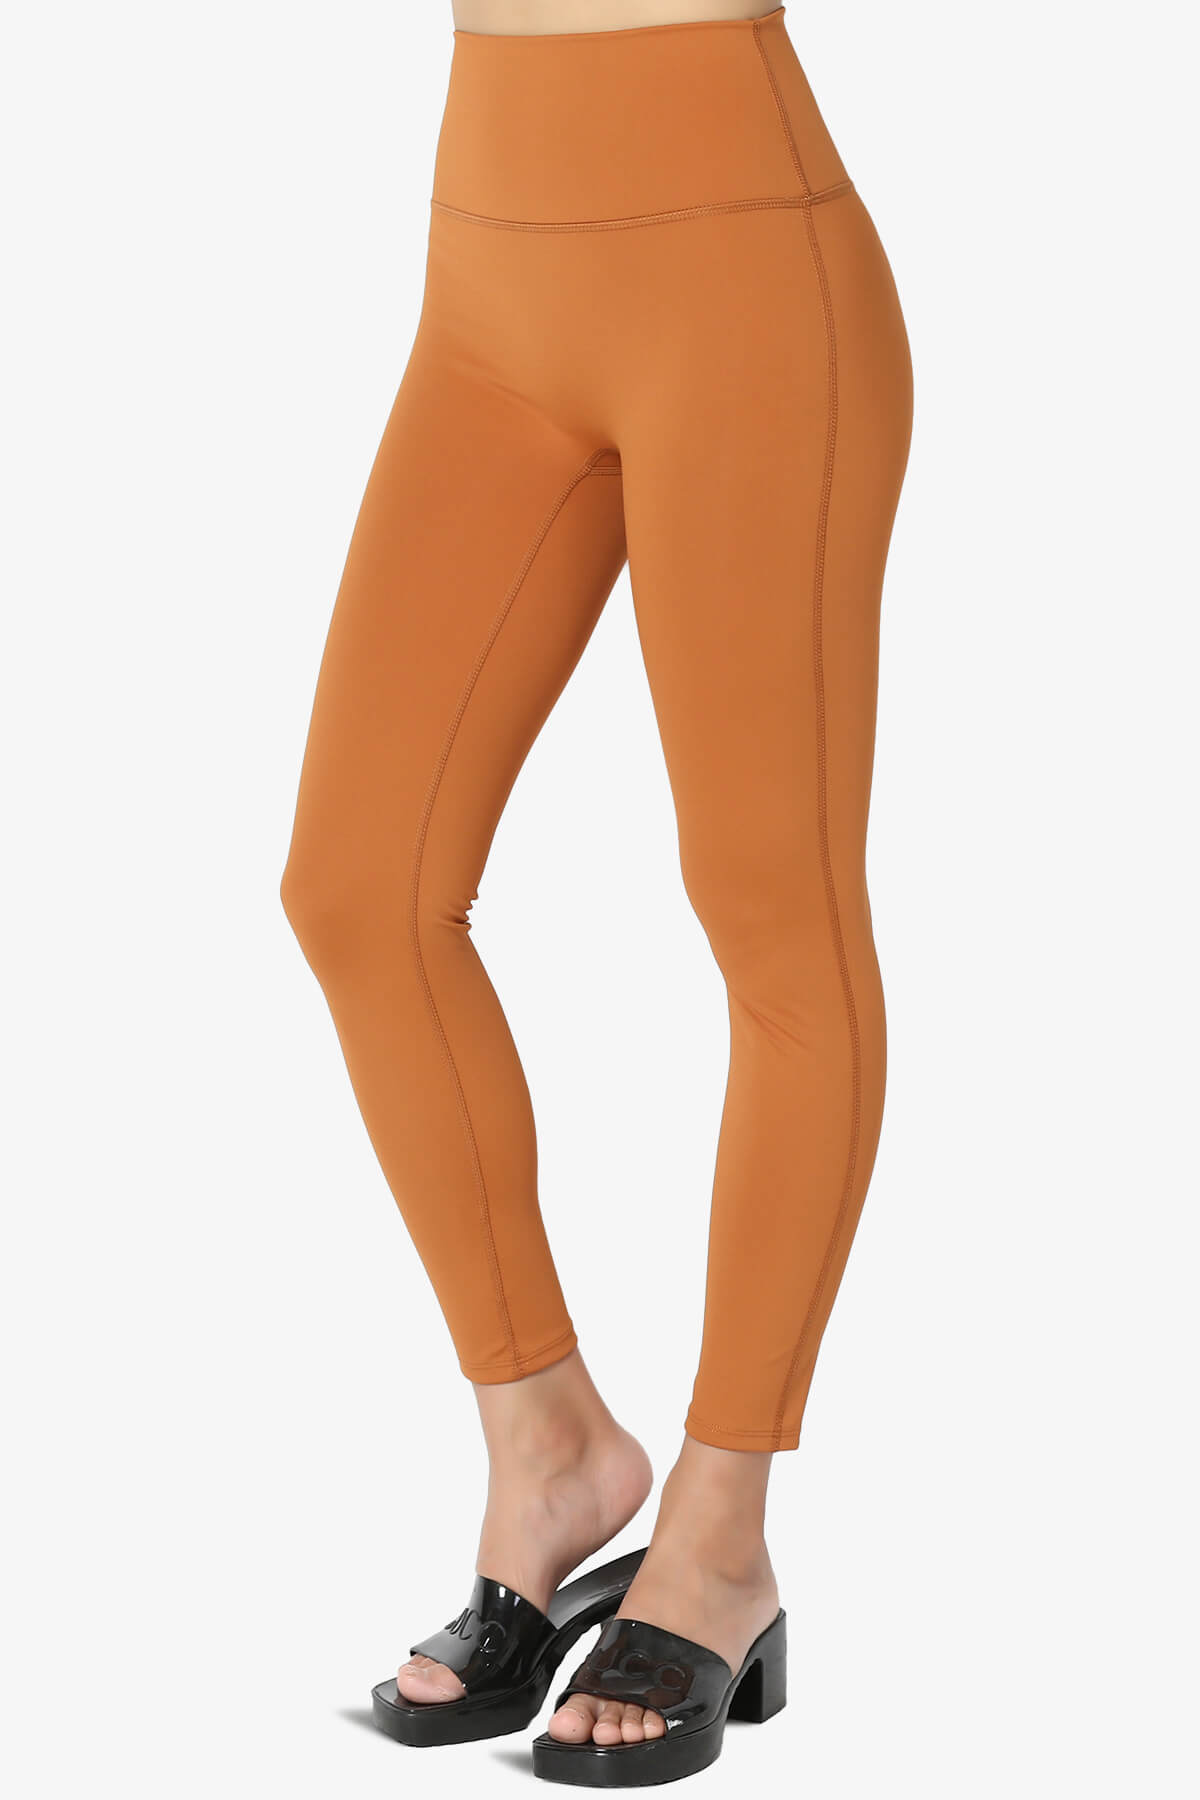 Load image into Gallery viewer, Mosco Athletic Tummy Control Workout Leggings ALMOND_3
